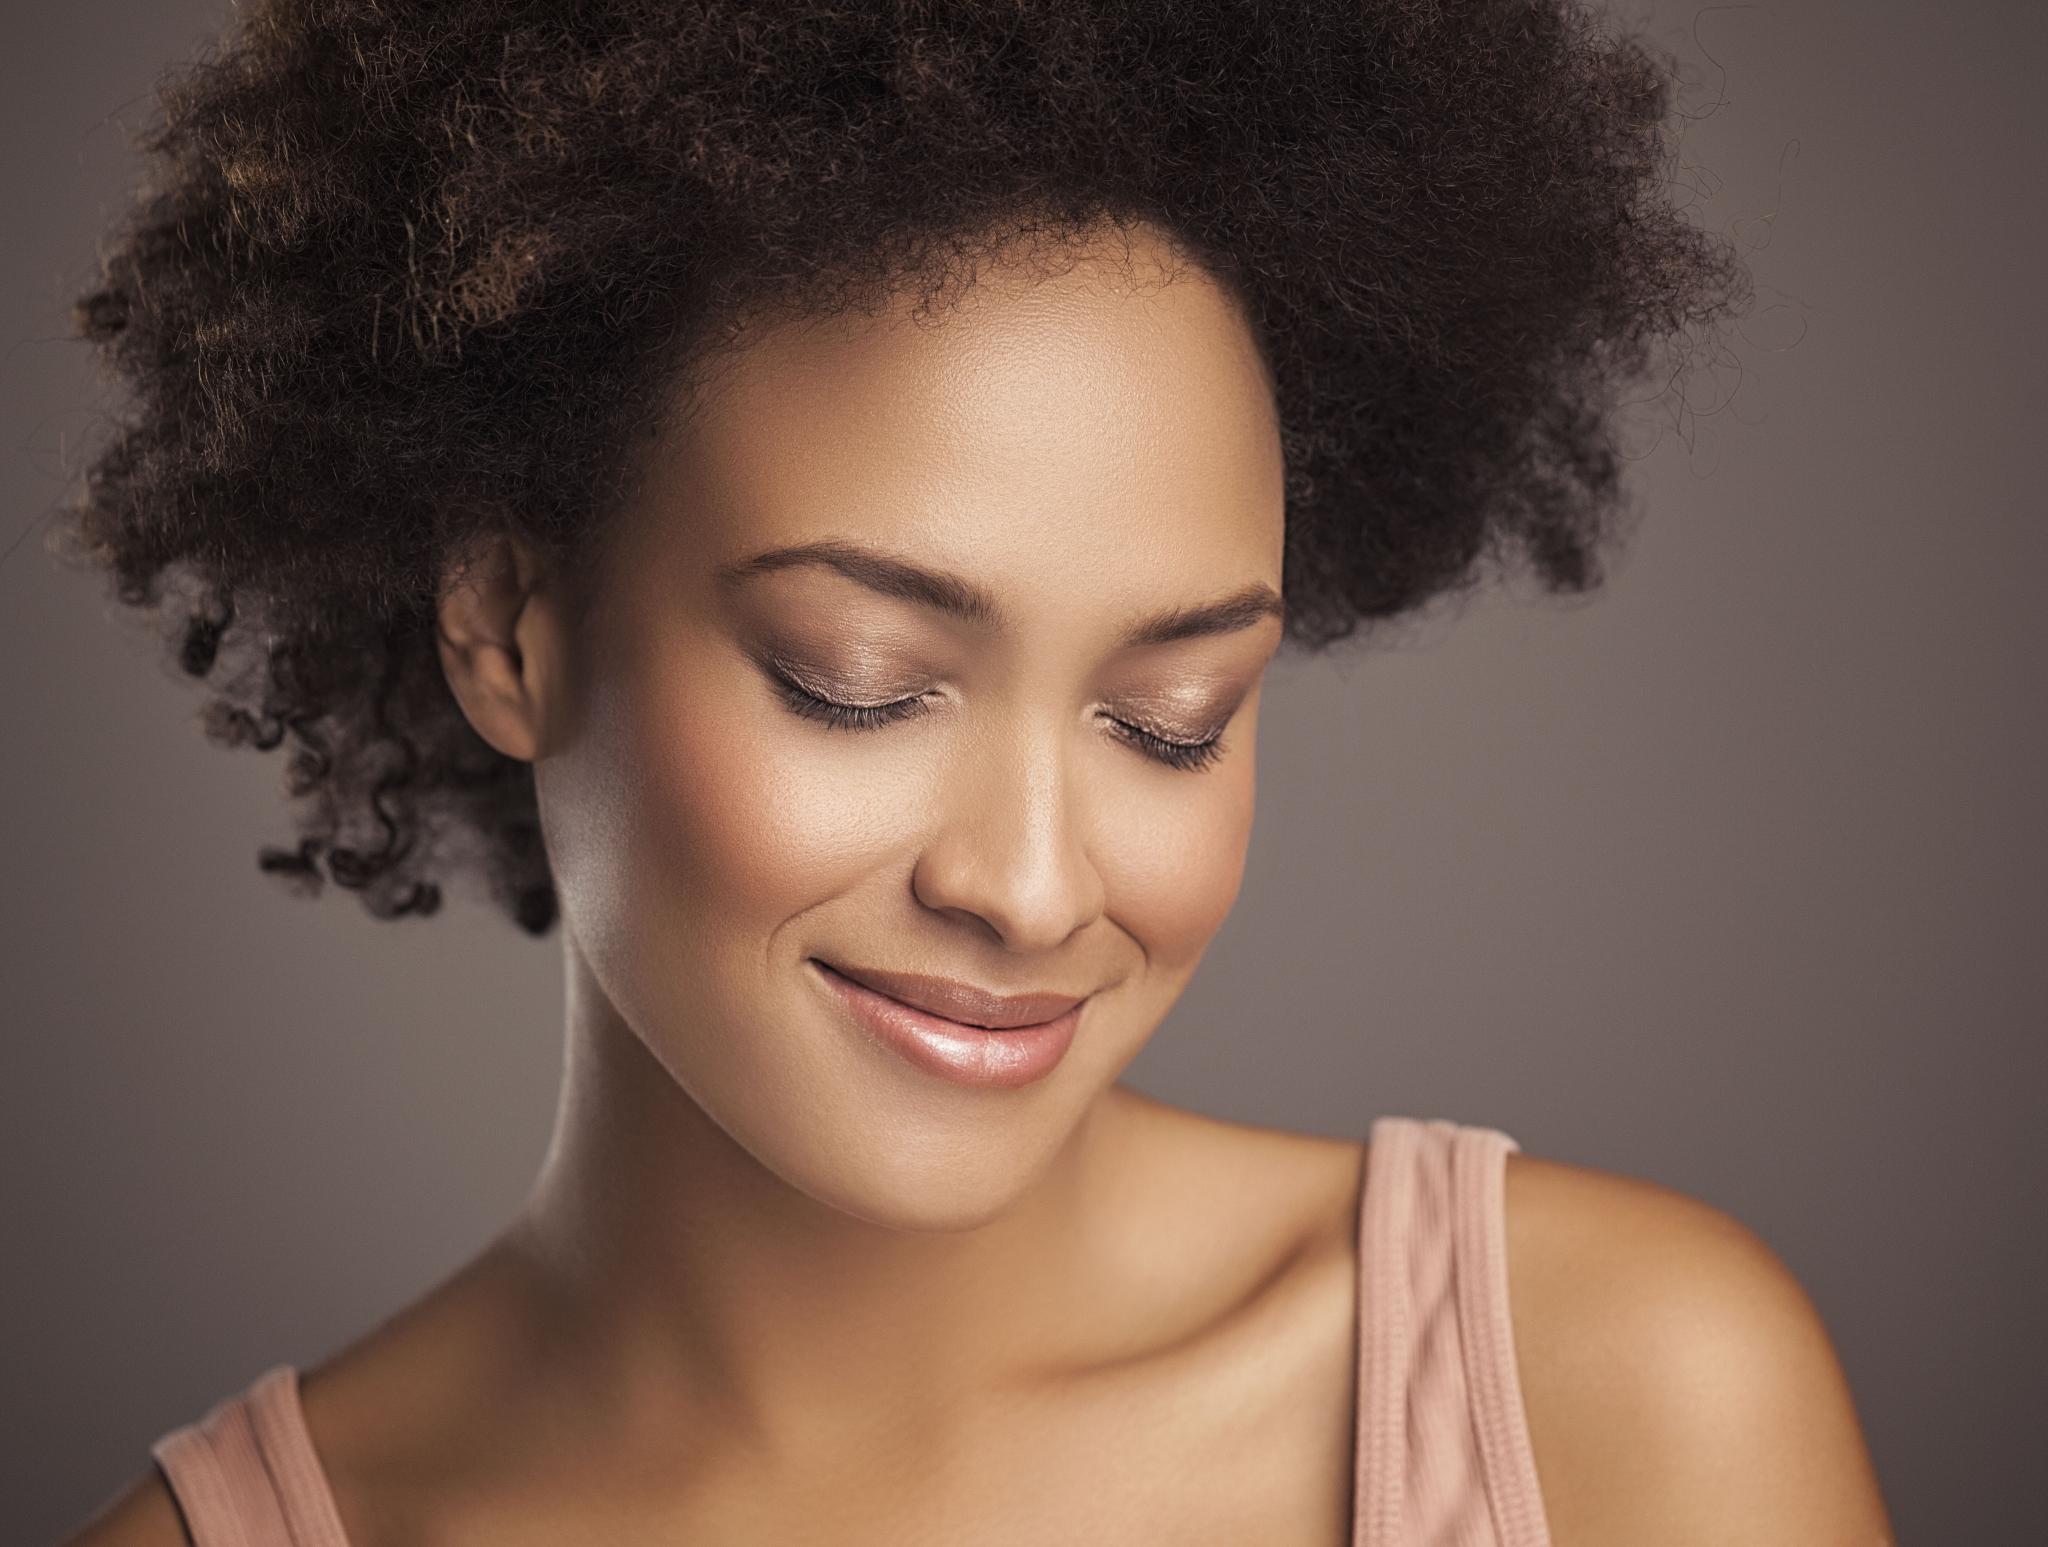 Ask The Experts: Best Ways To Minimize Hair Breakage